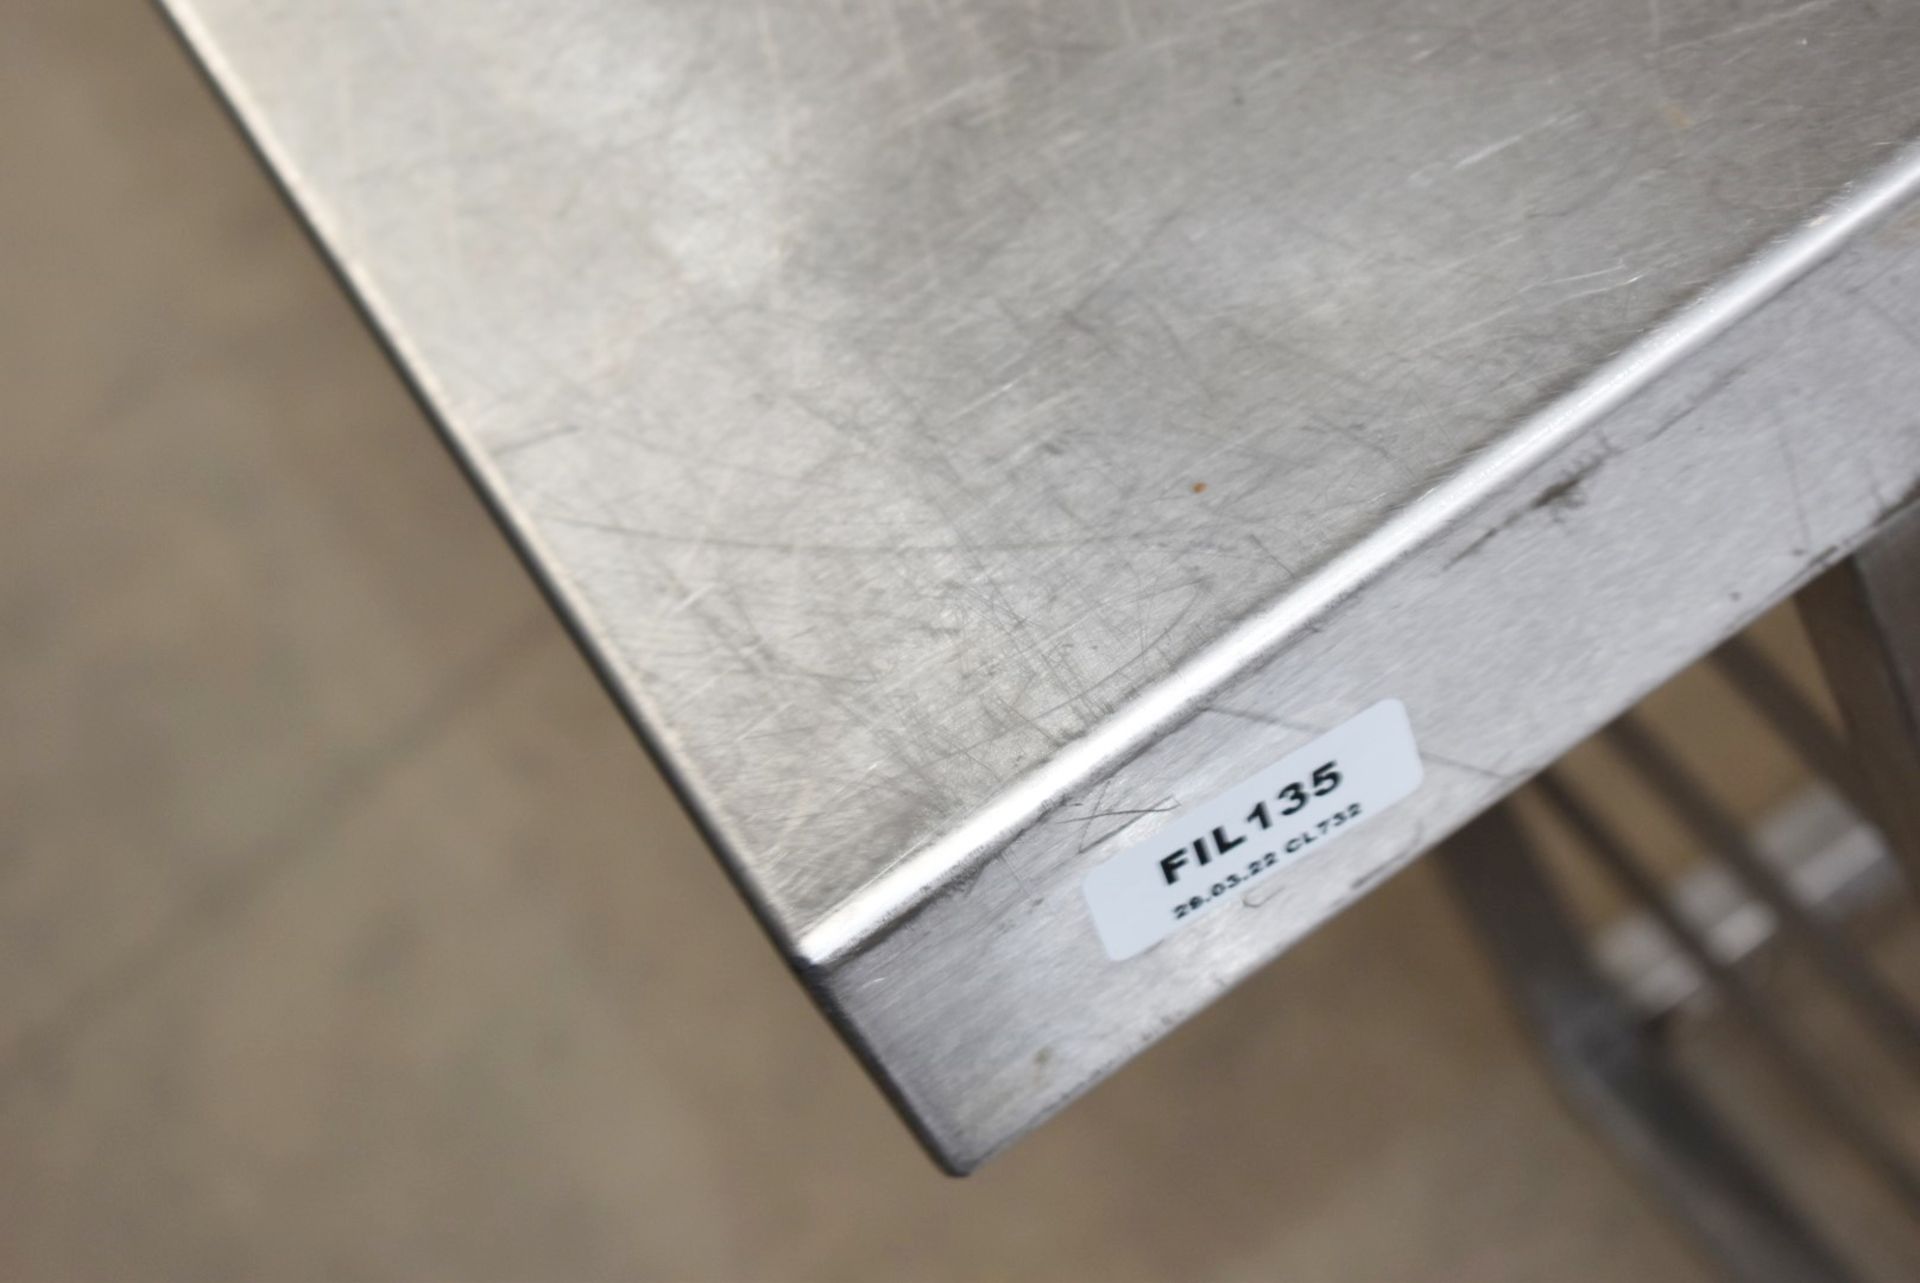 1 x Stainless Steel Prep Table With Tray Runners - Dimensions: H84 x W70 x D50 cms - Image 5 of 5